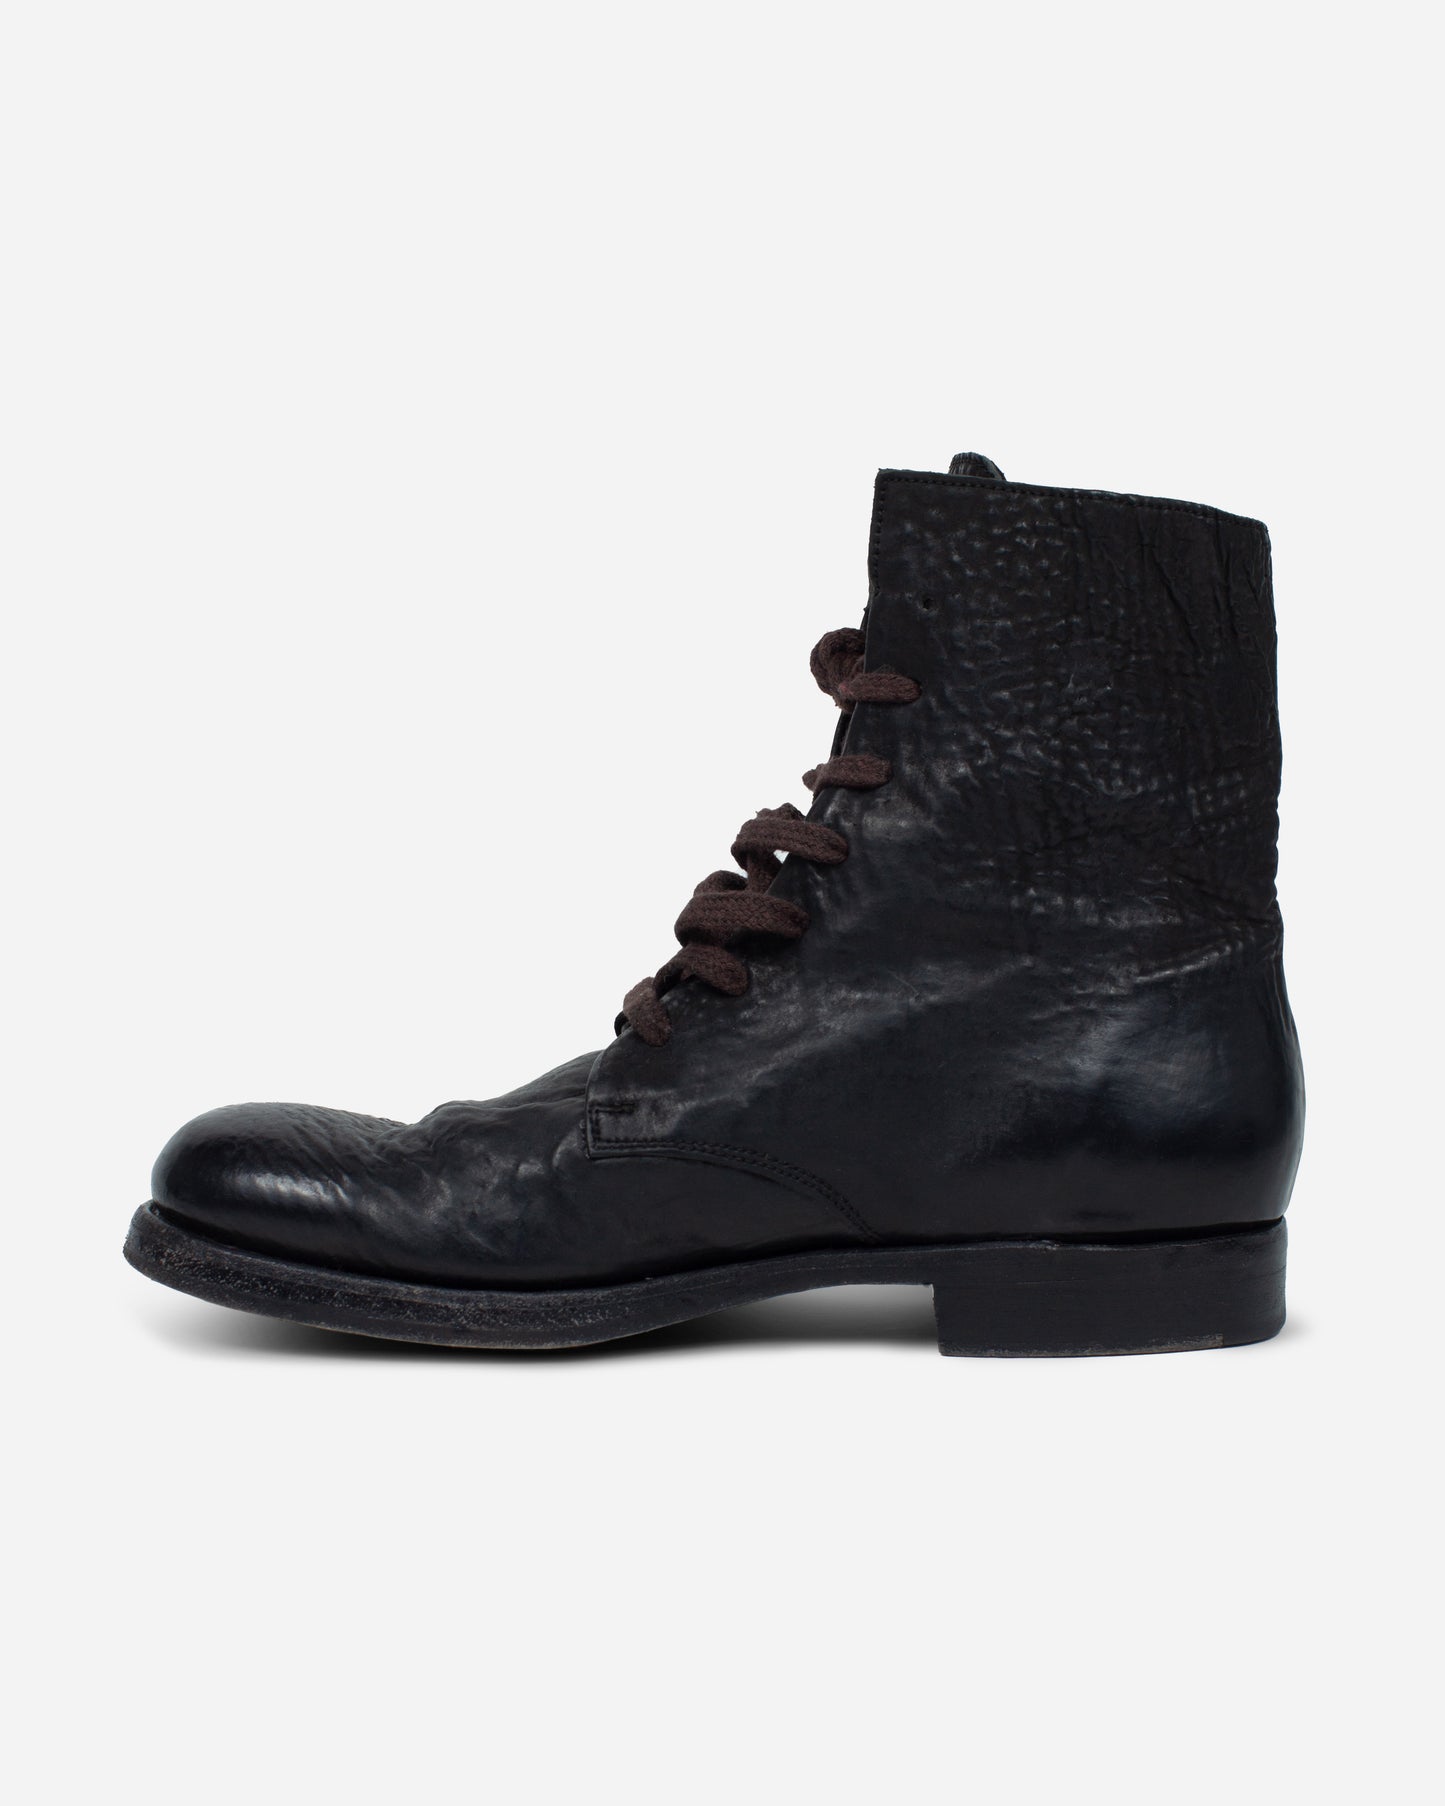 ASGAARD Reversed Leather Boots